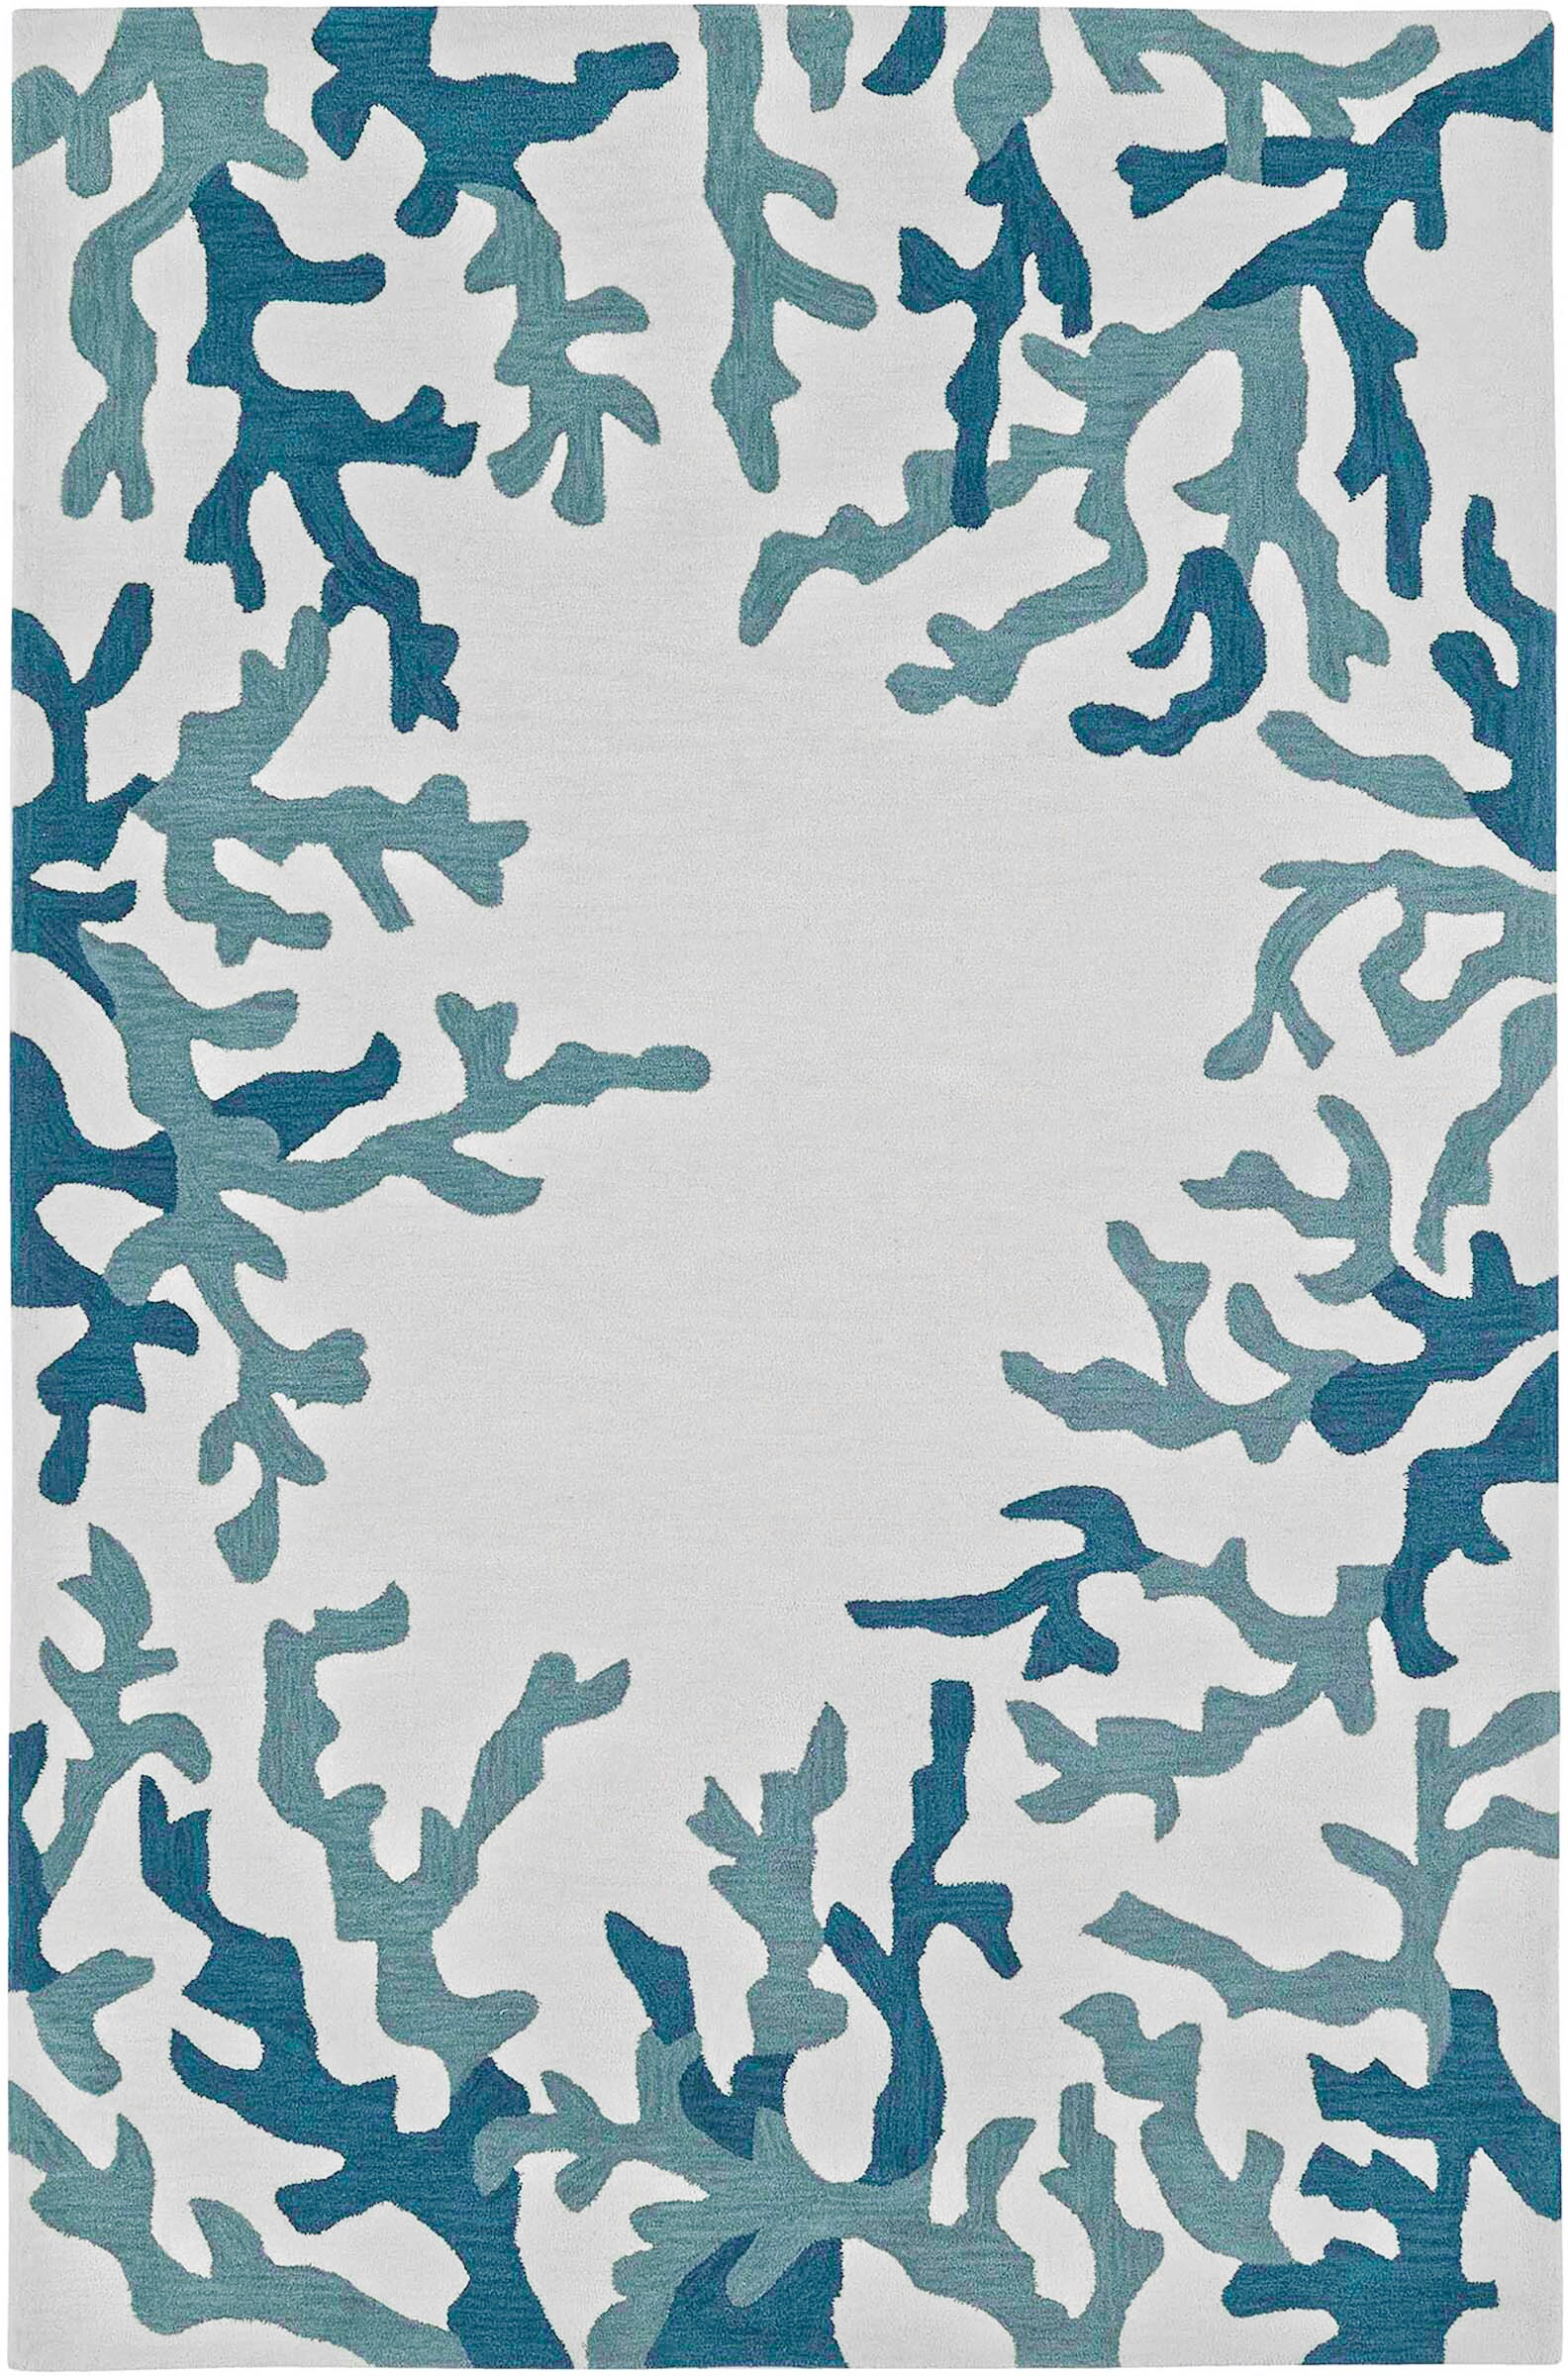 Addison Rugs Beaches 8 x 10 Navy Indoor Coastal Area Rug at Lowes.com